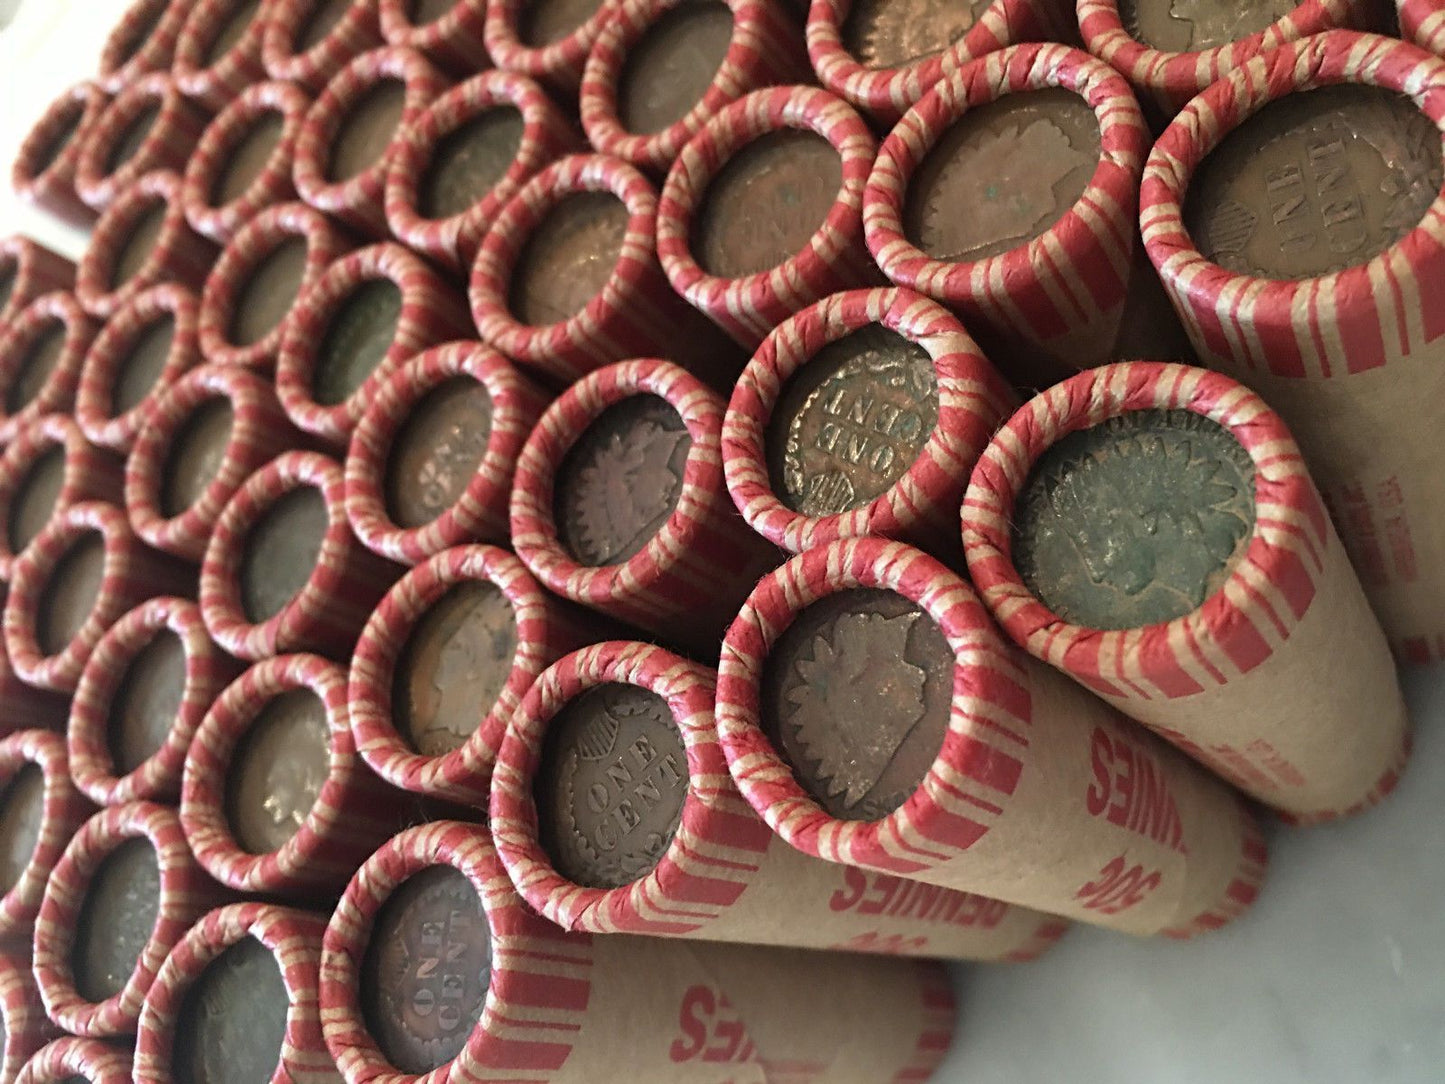 OLD WHEAT PENNY ROLLS WITH INDIAN HEAD CENTS SHOWING